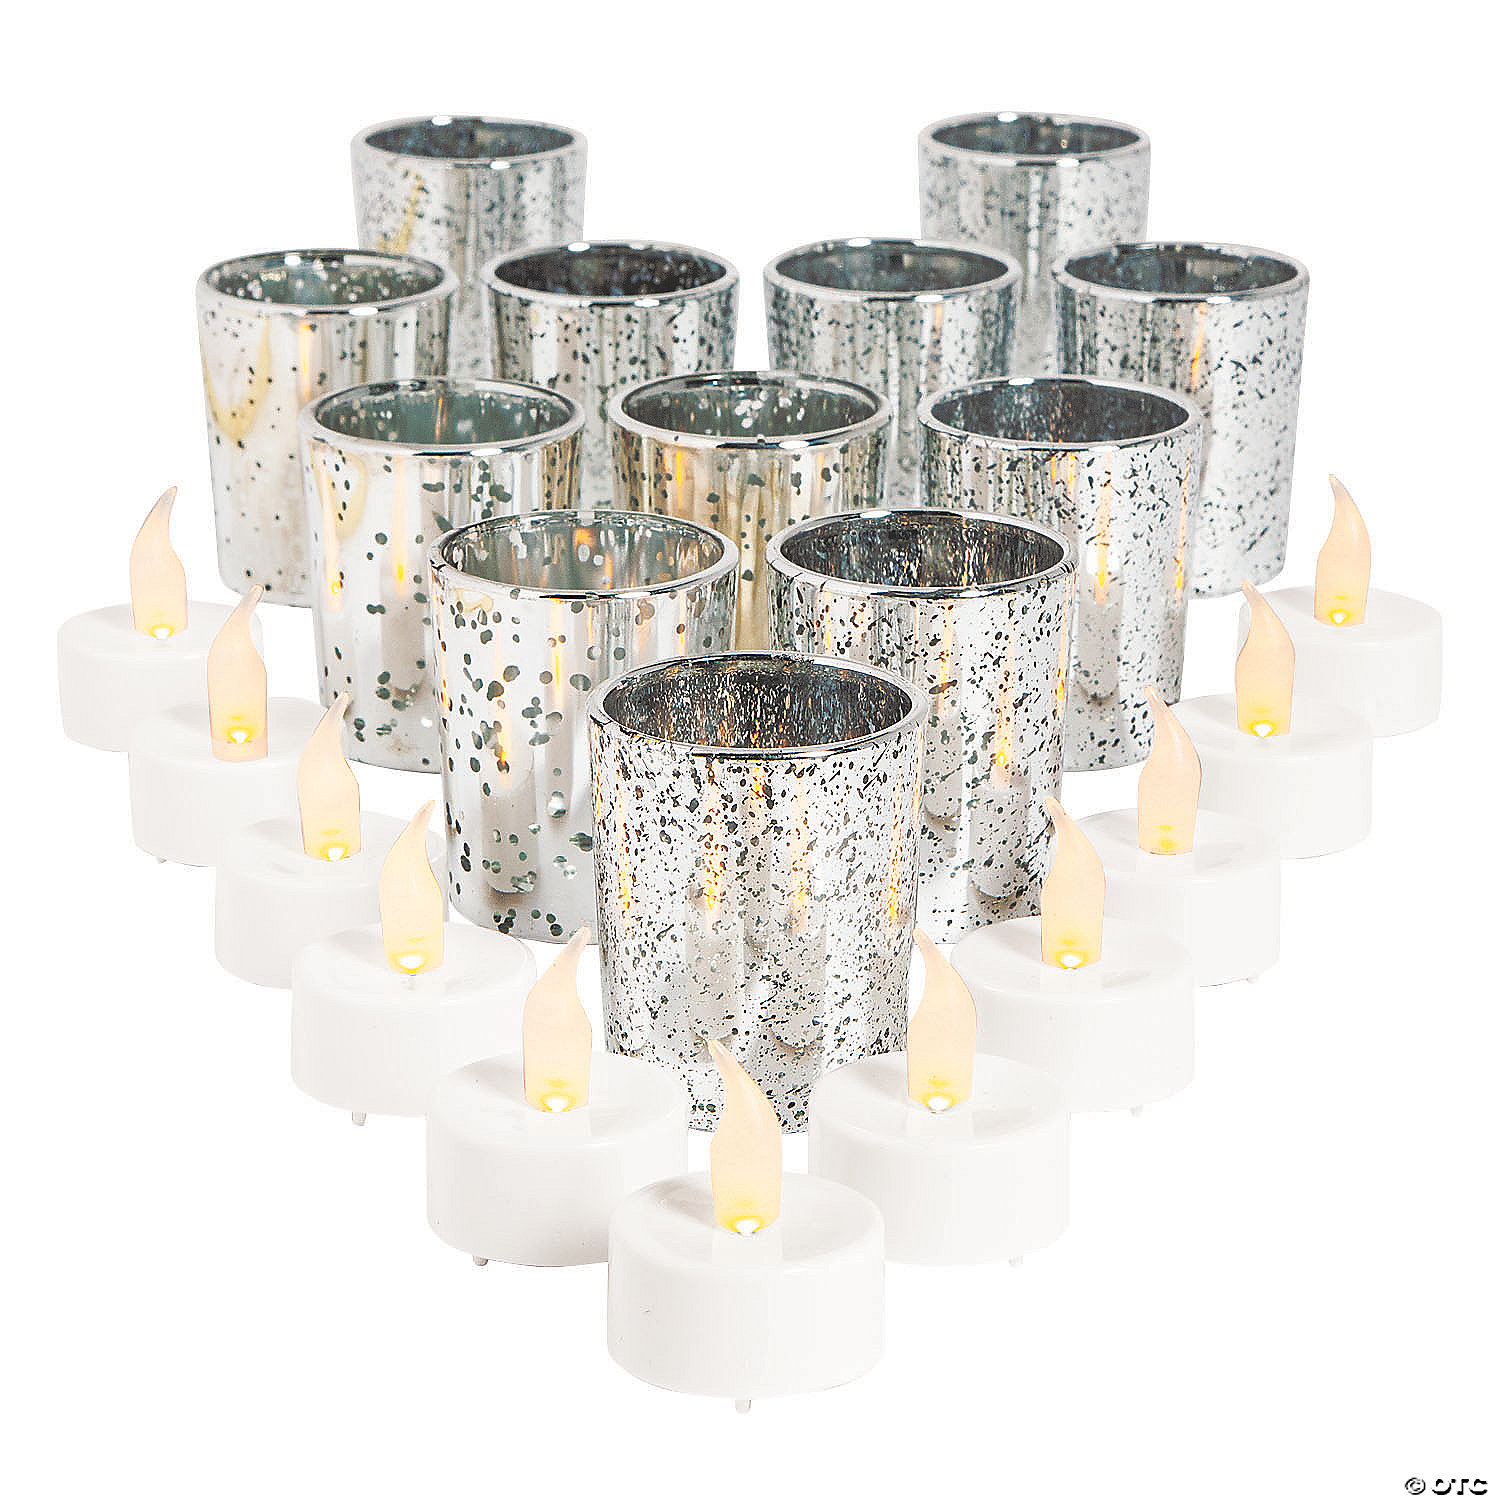 Silver Mercury lass Votive Candle Holders with Battery-Operated Light Candles Rose Morning